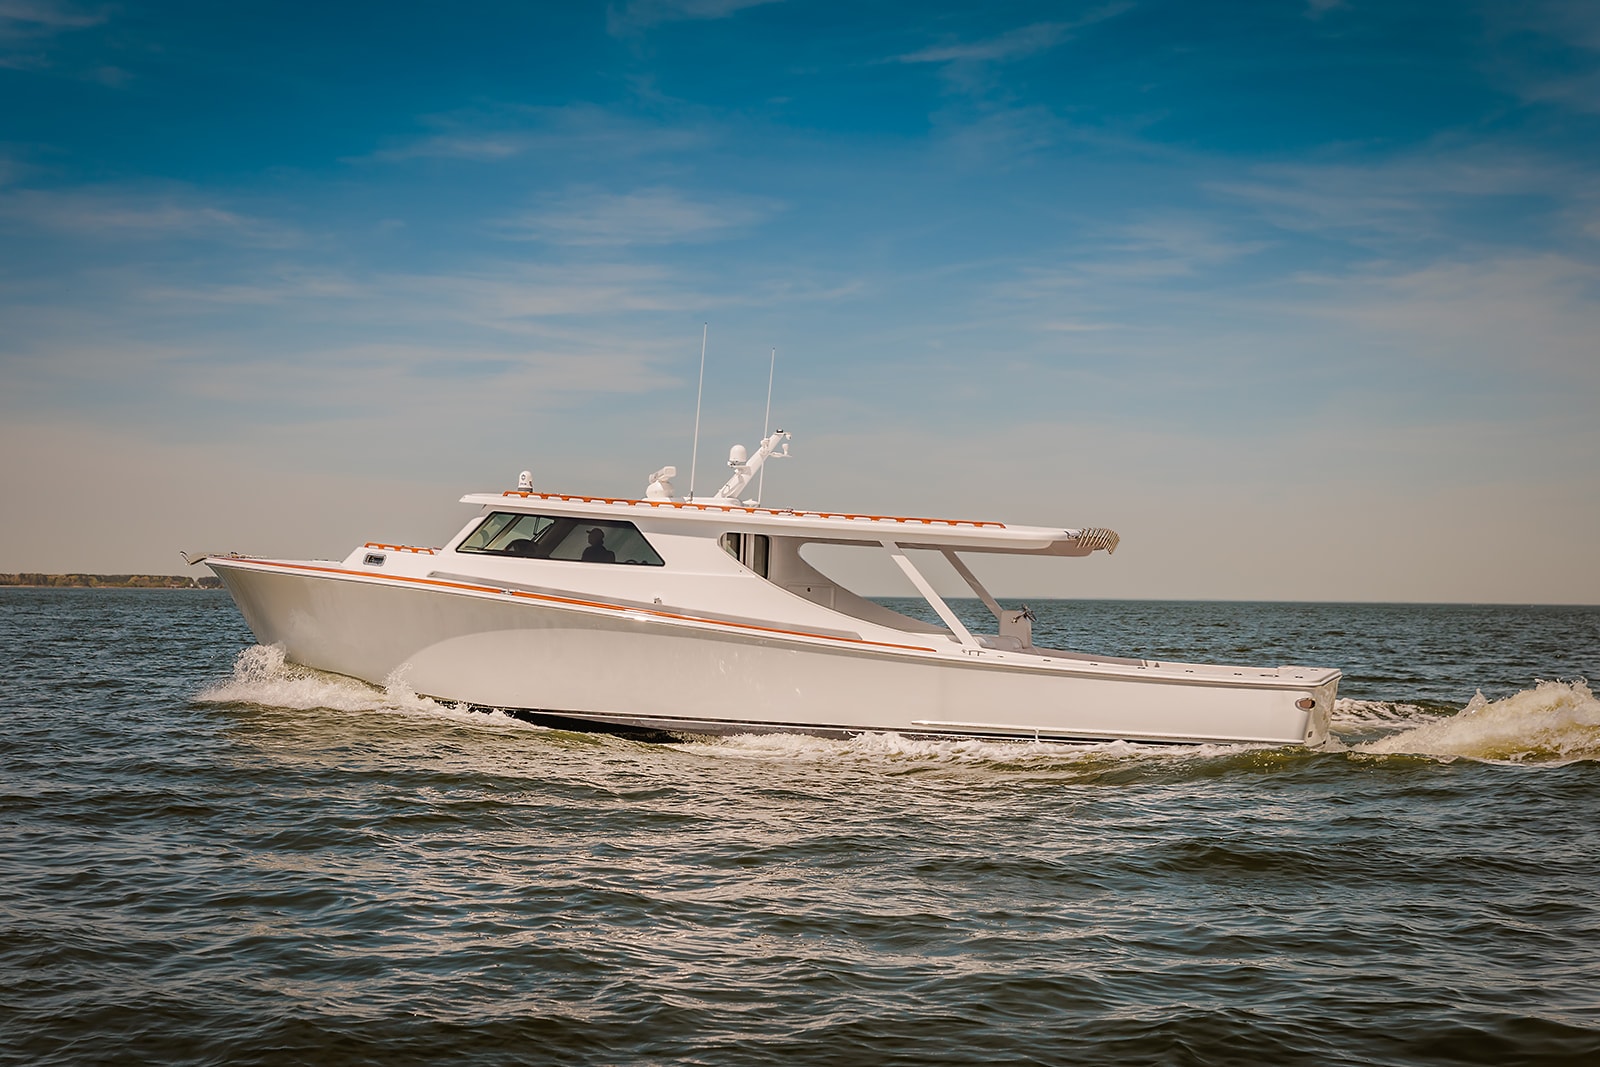 Composite Yacht's New CY55 Is an Easily Customizable Sportfishing